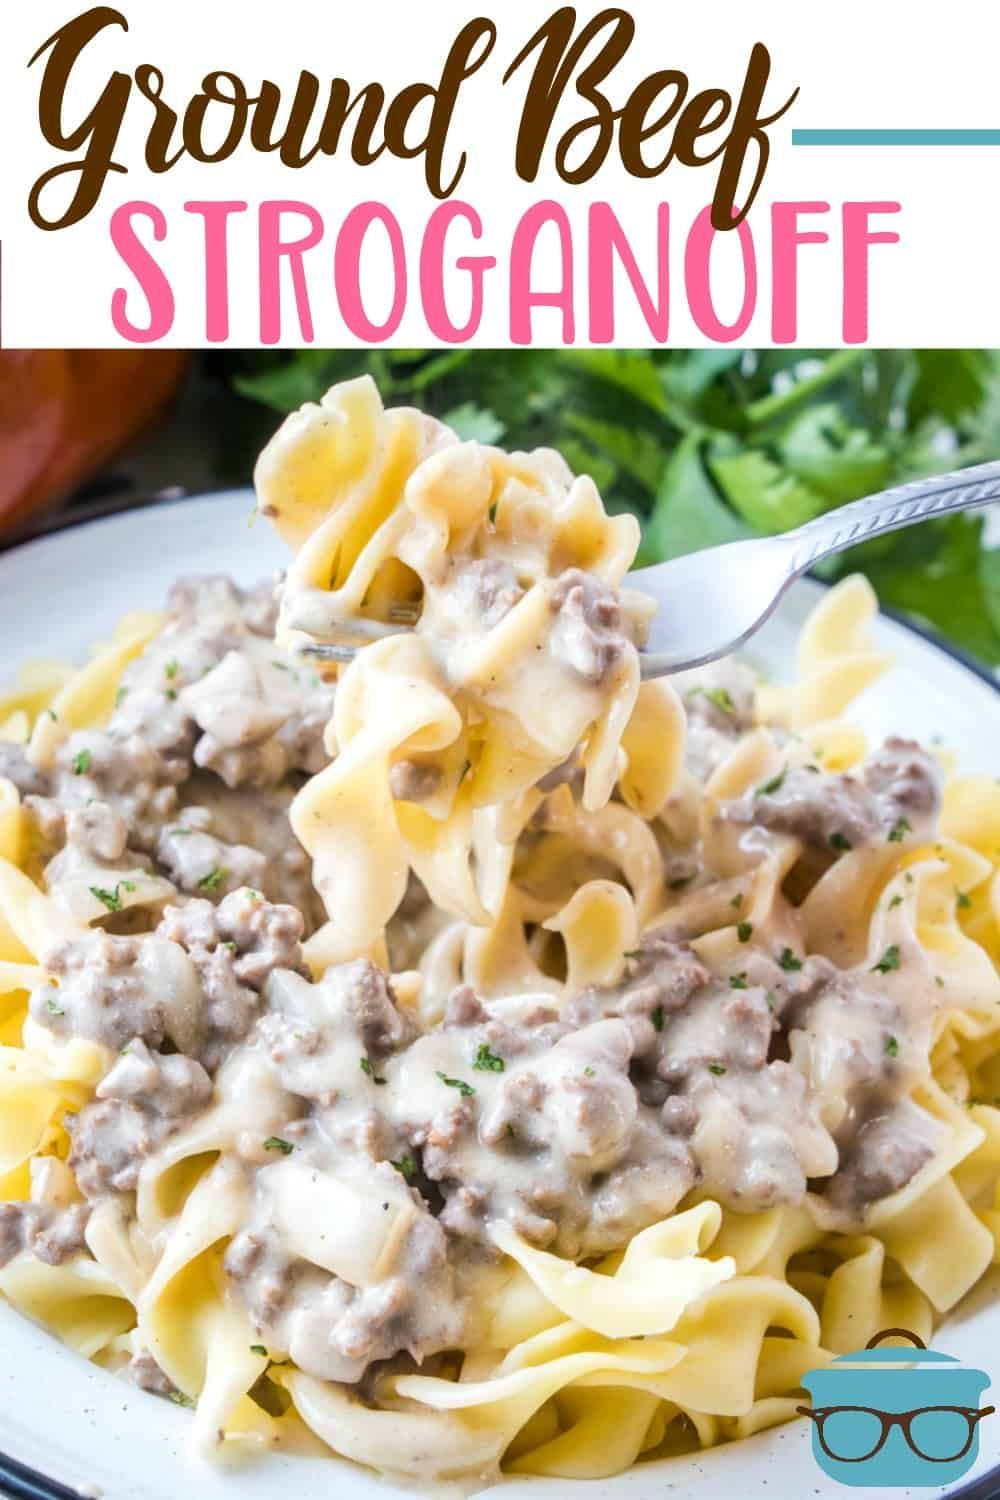 Ground Beef Stroganoff -   14 healthy recipes For One main dishes ideas